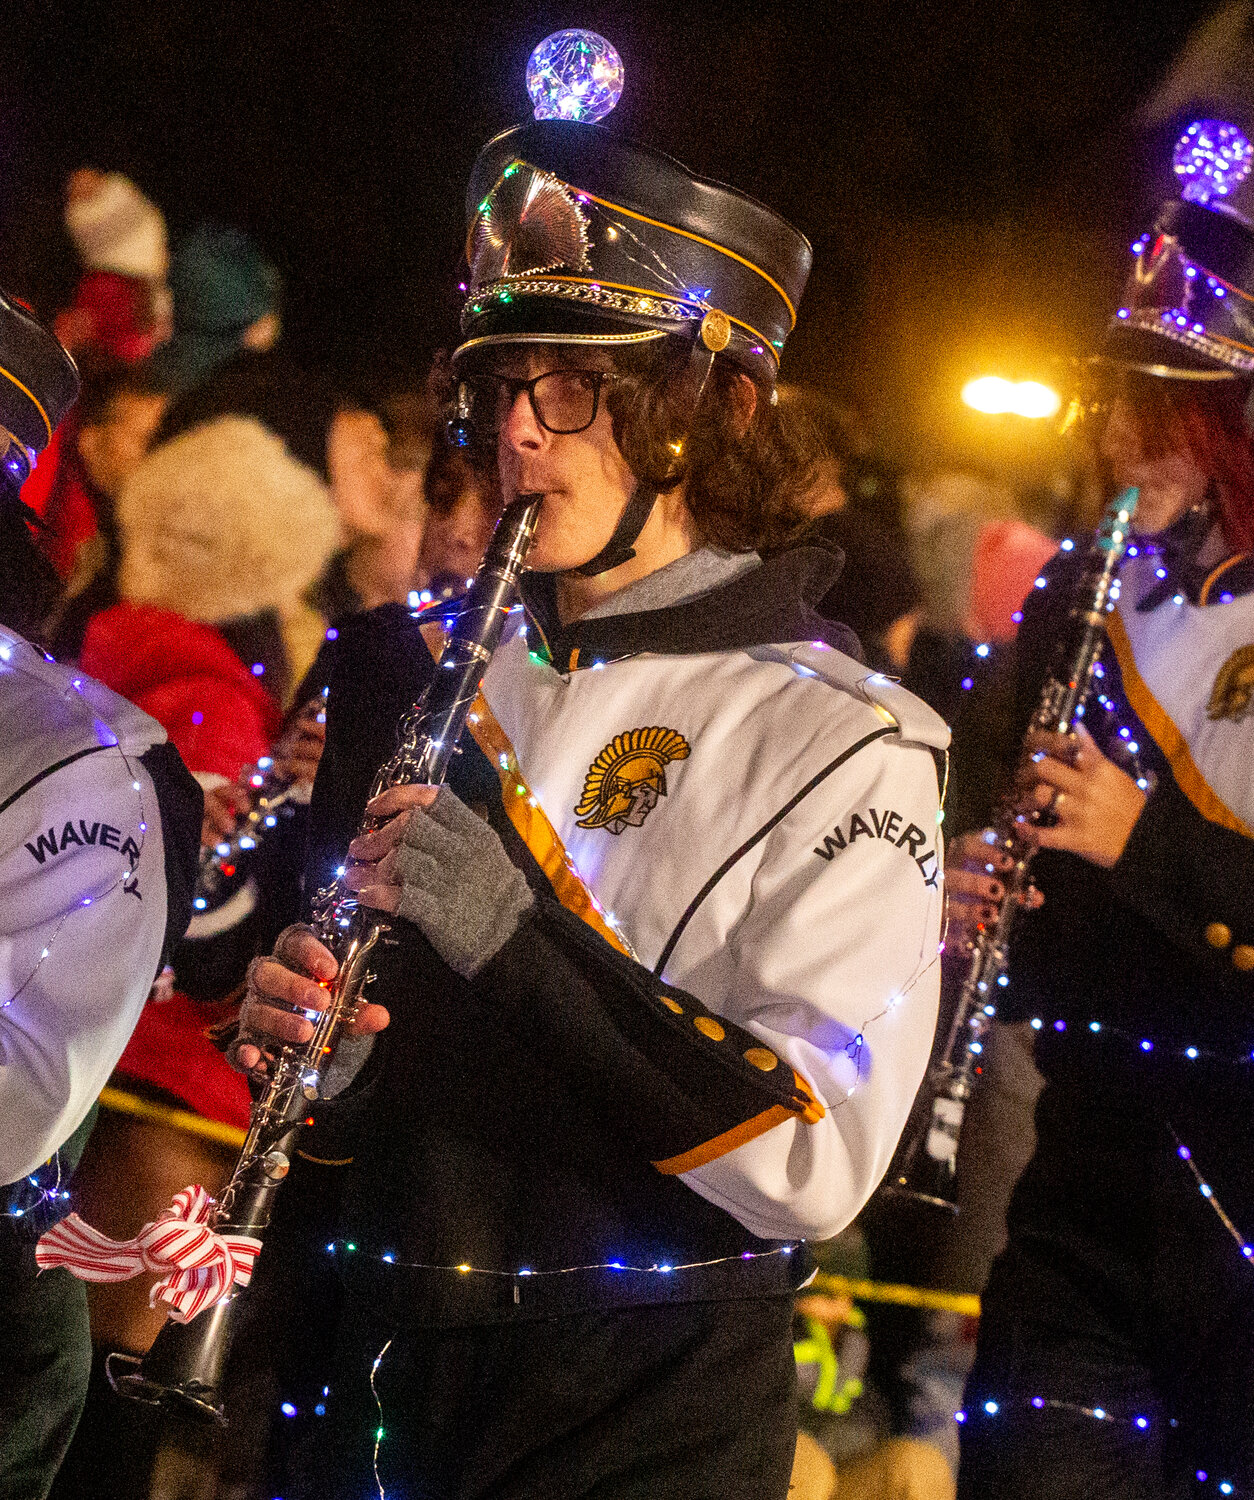 Members of the Waverly High School Marching Band donned holiday lights to brighten up the Electric Light Parade.